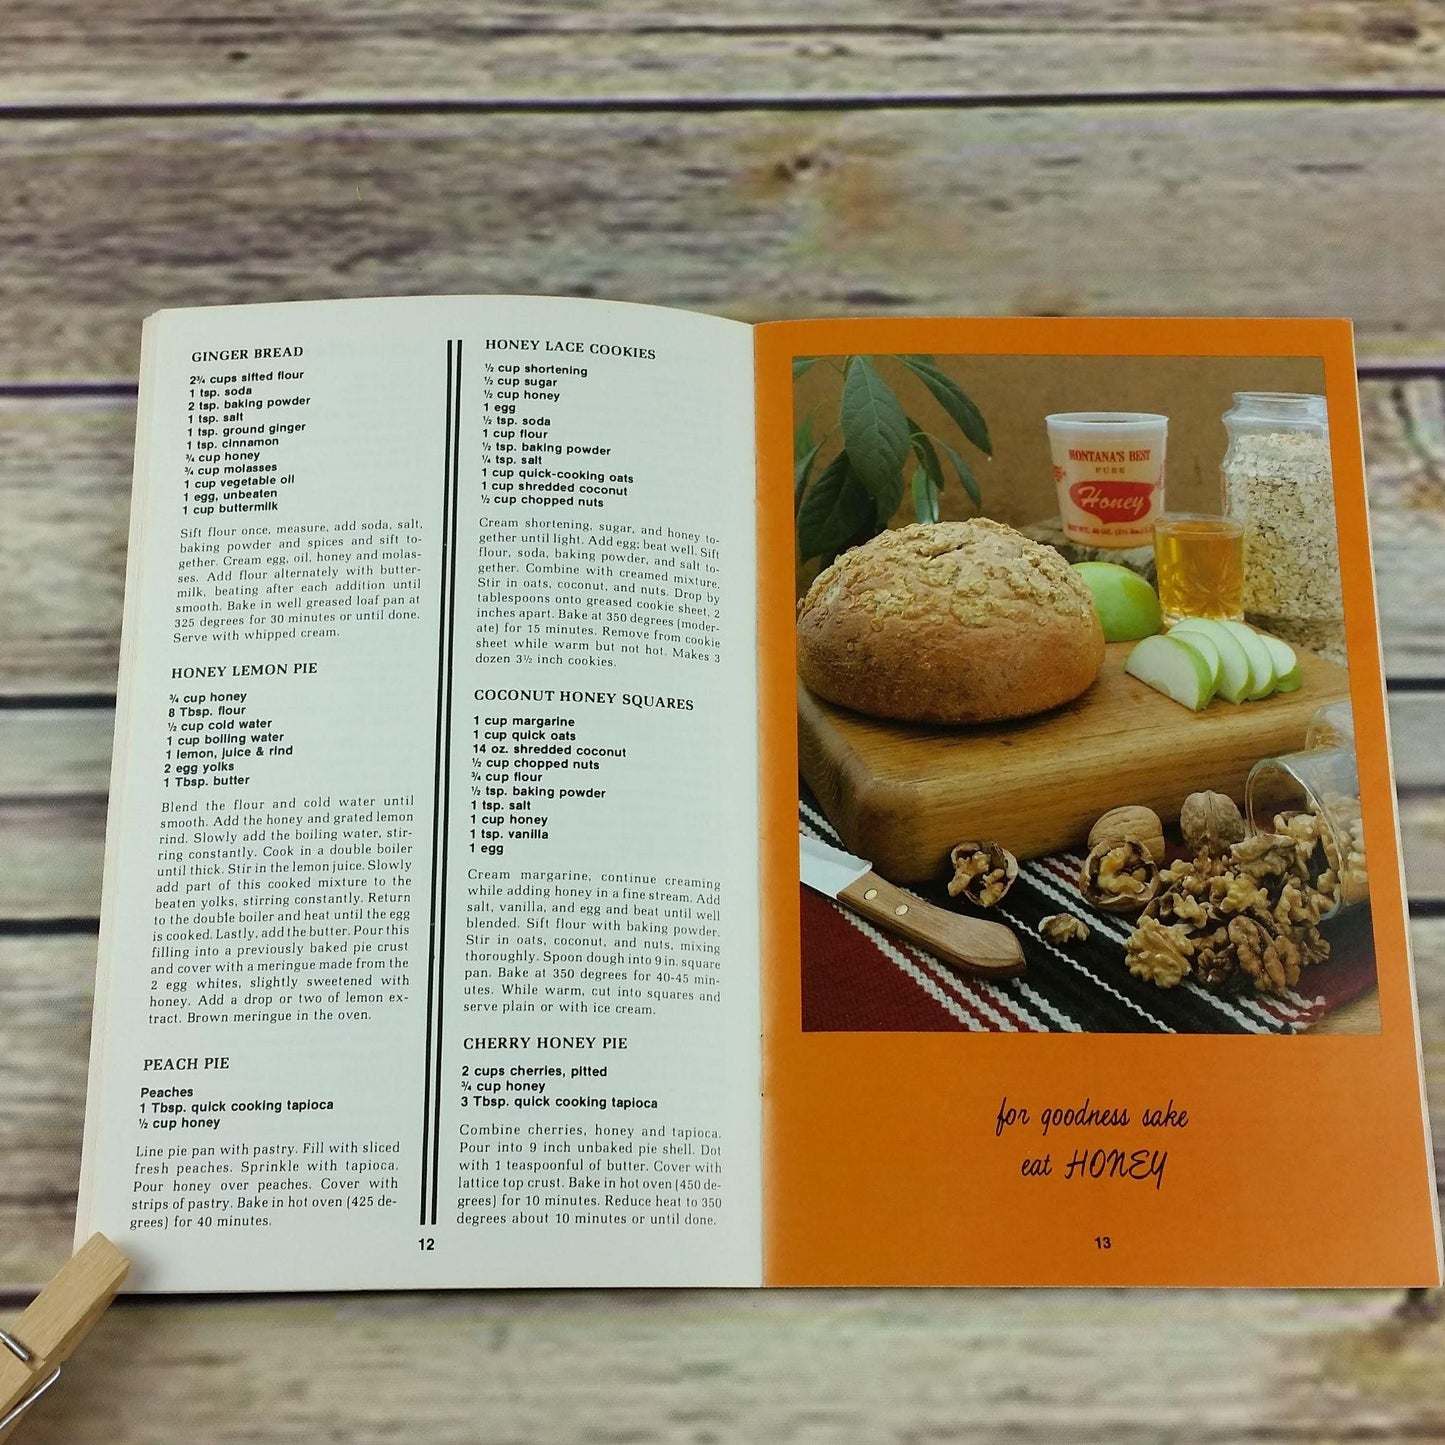 Vintage Cookbook Cook with Montanas Best Honey Recipes Promo Booklet 1990s